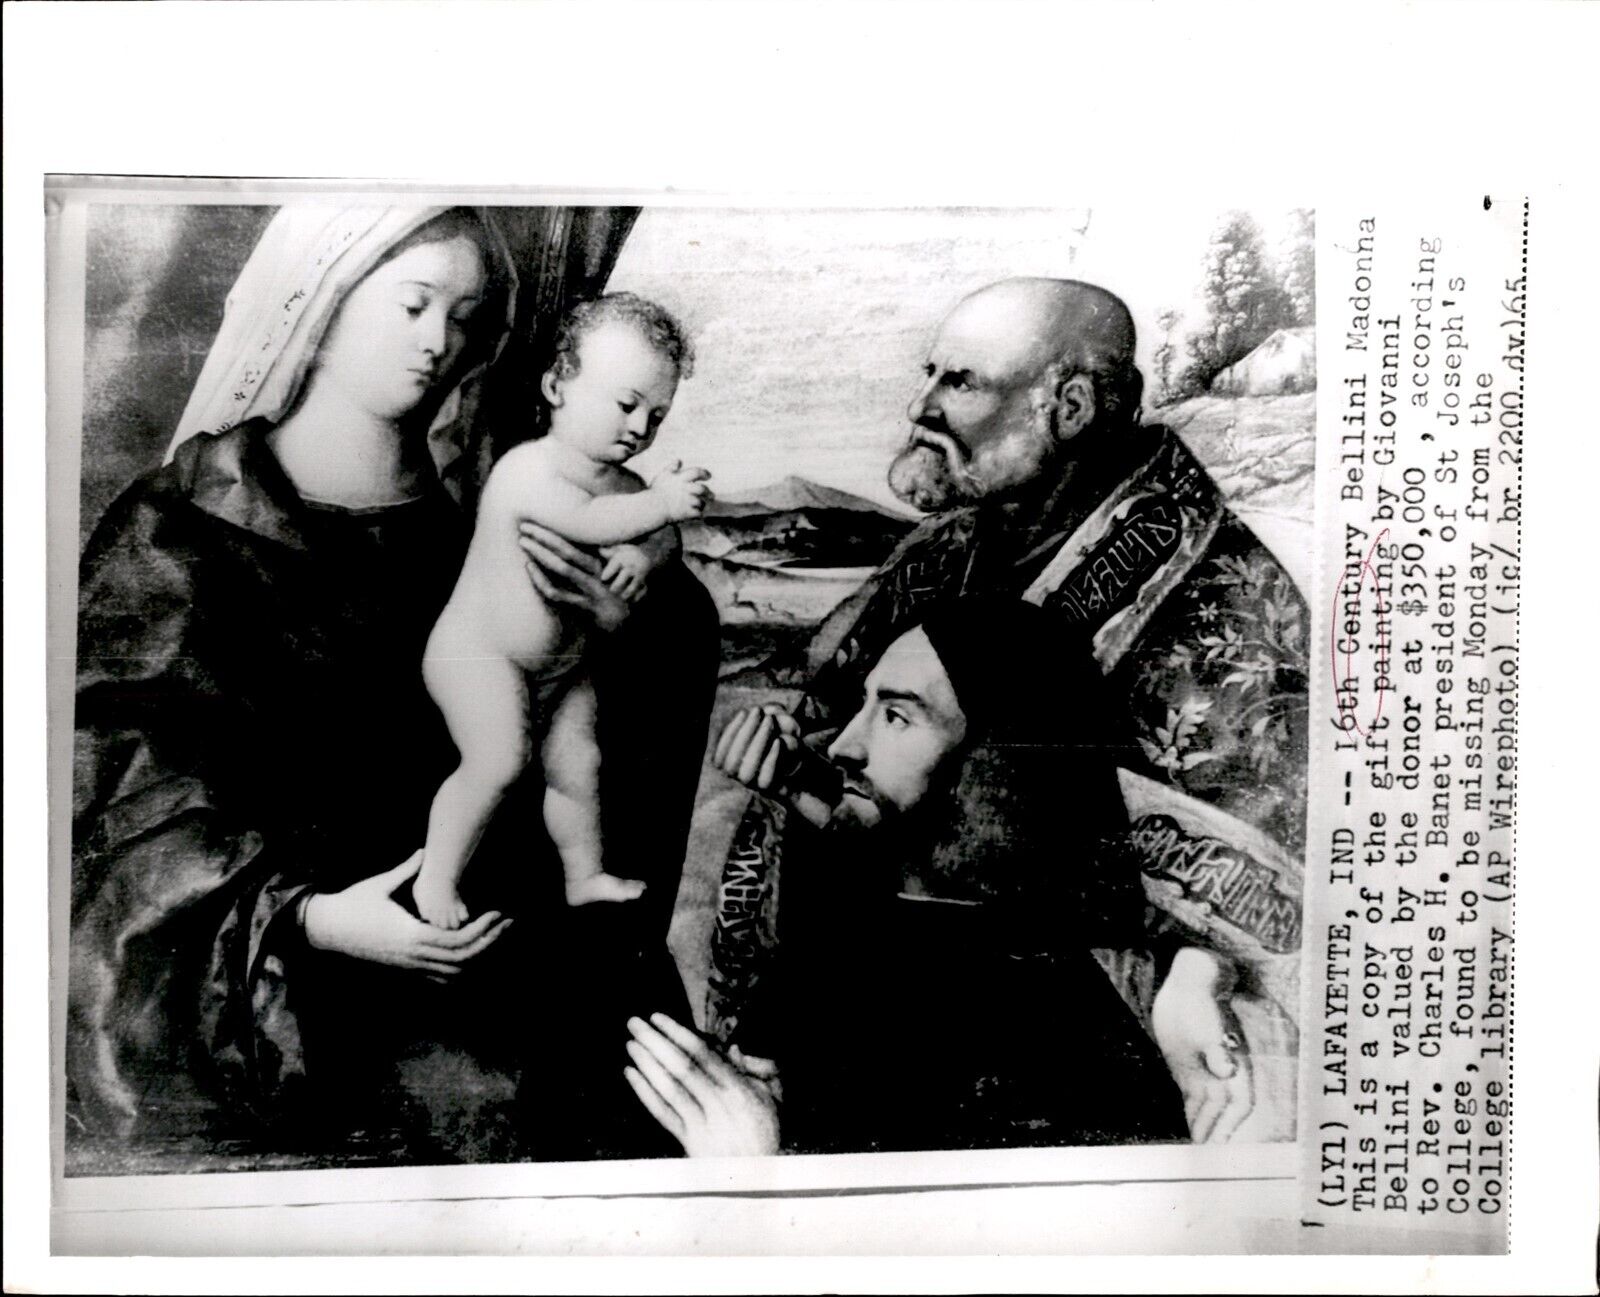 LG51 1965 AP Wire Photo 16TH CENTURY BELLINI MADONNA PAINTING FOUND MISSING